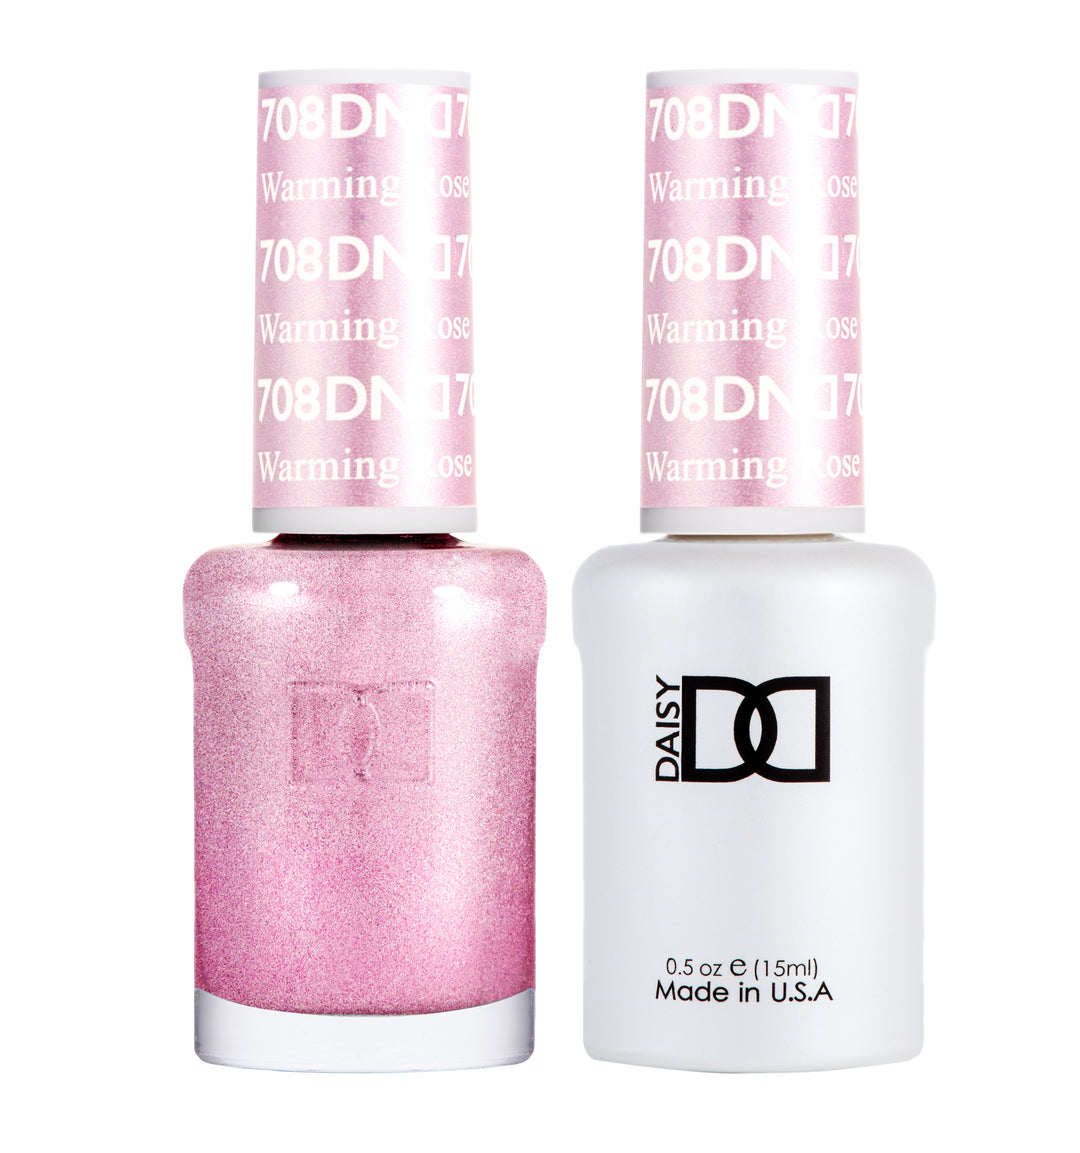 DND DUO Nail Lacquer and UV|LED Gel Polish Warming Rose 708 (2 x 15ml)